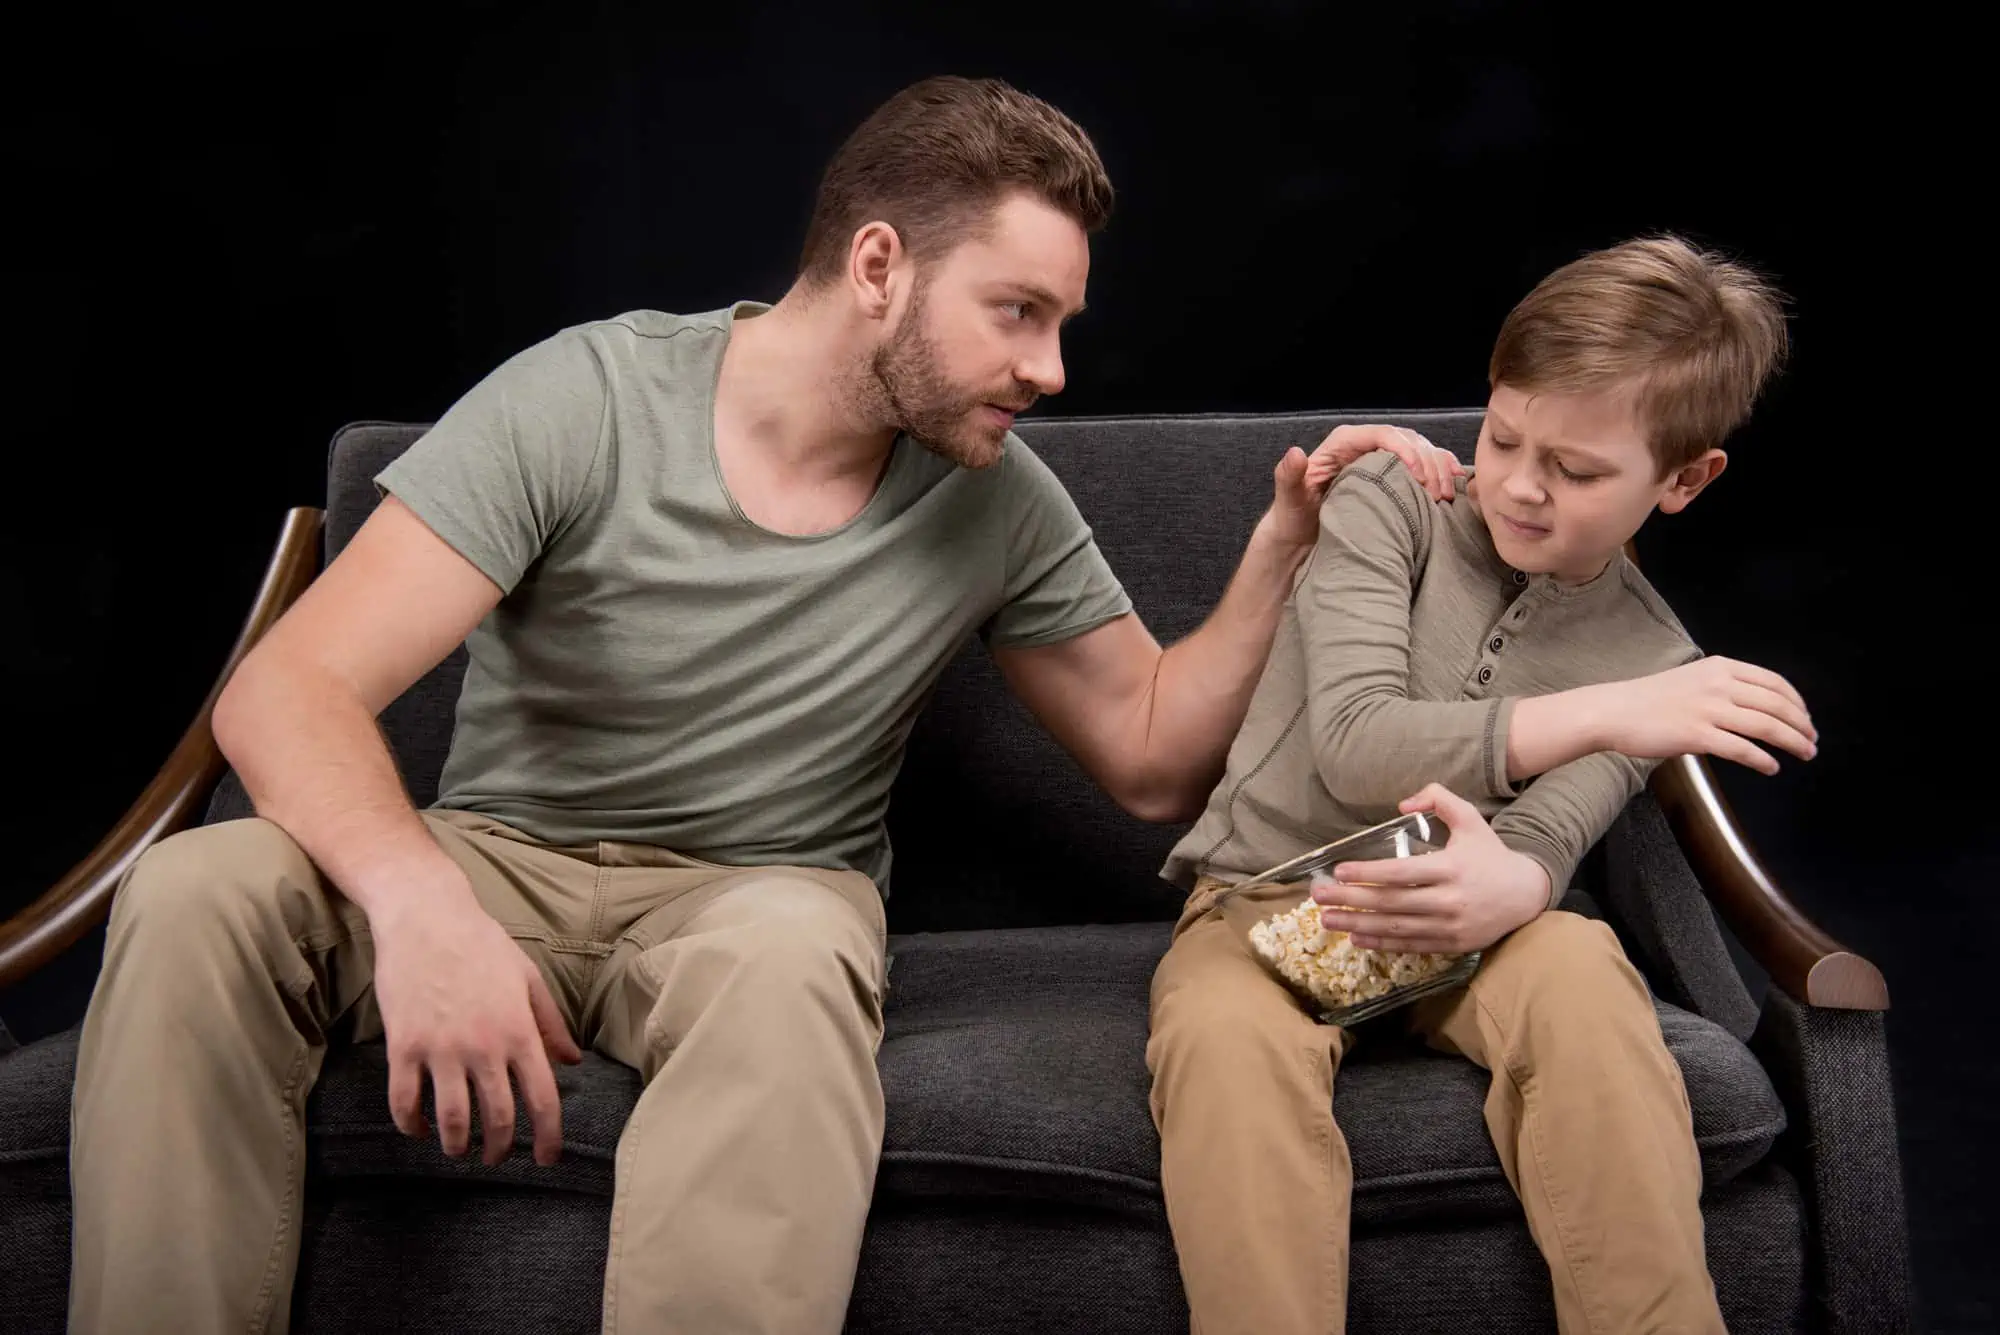 A man sitting next to a boy on a couch